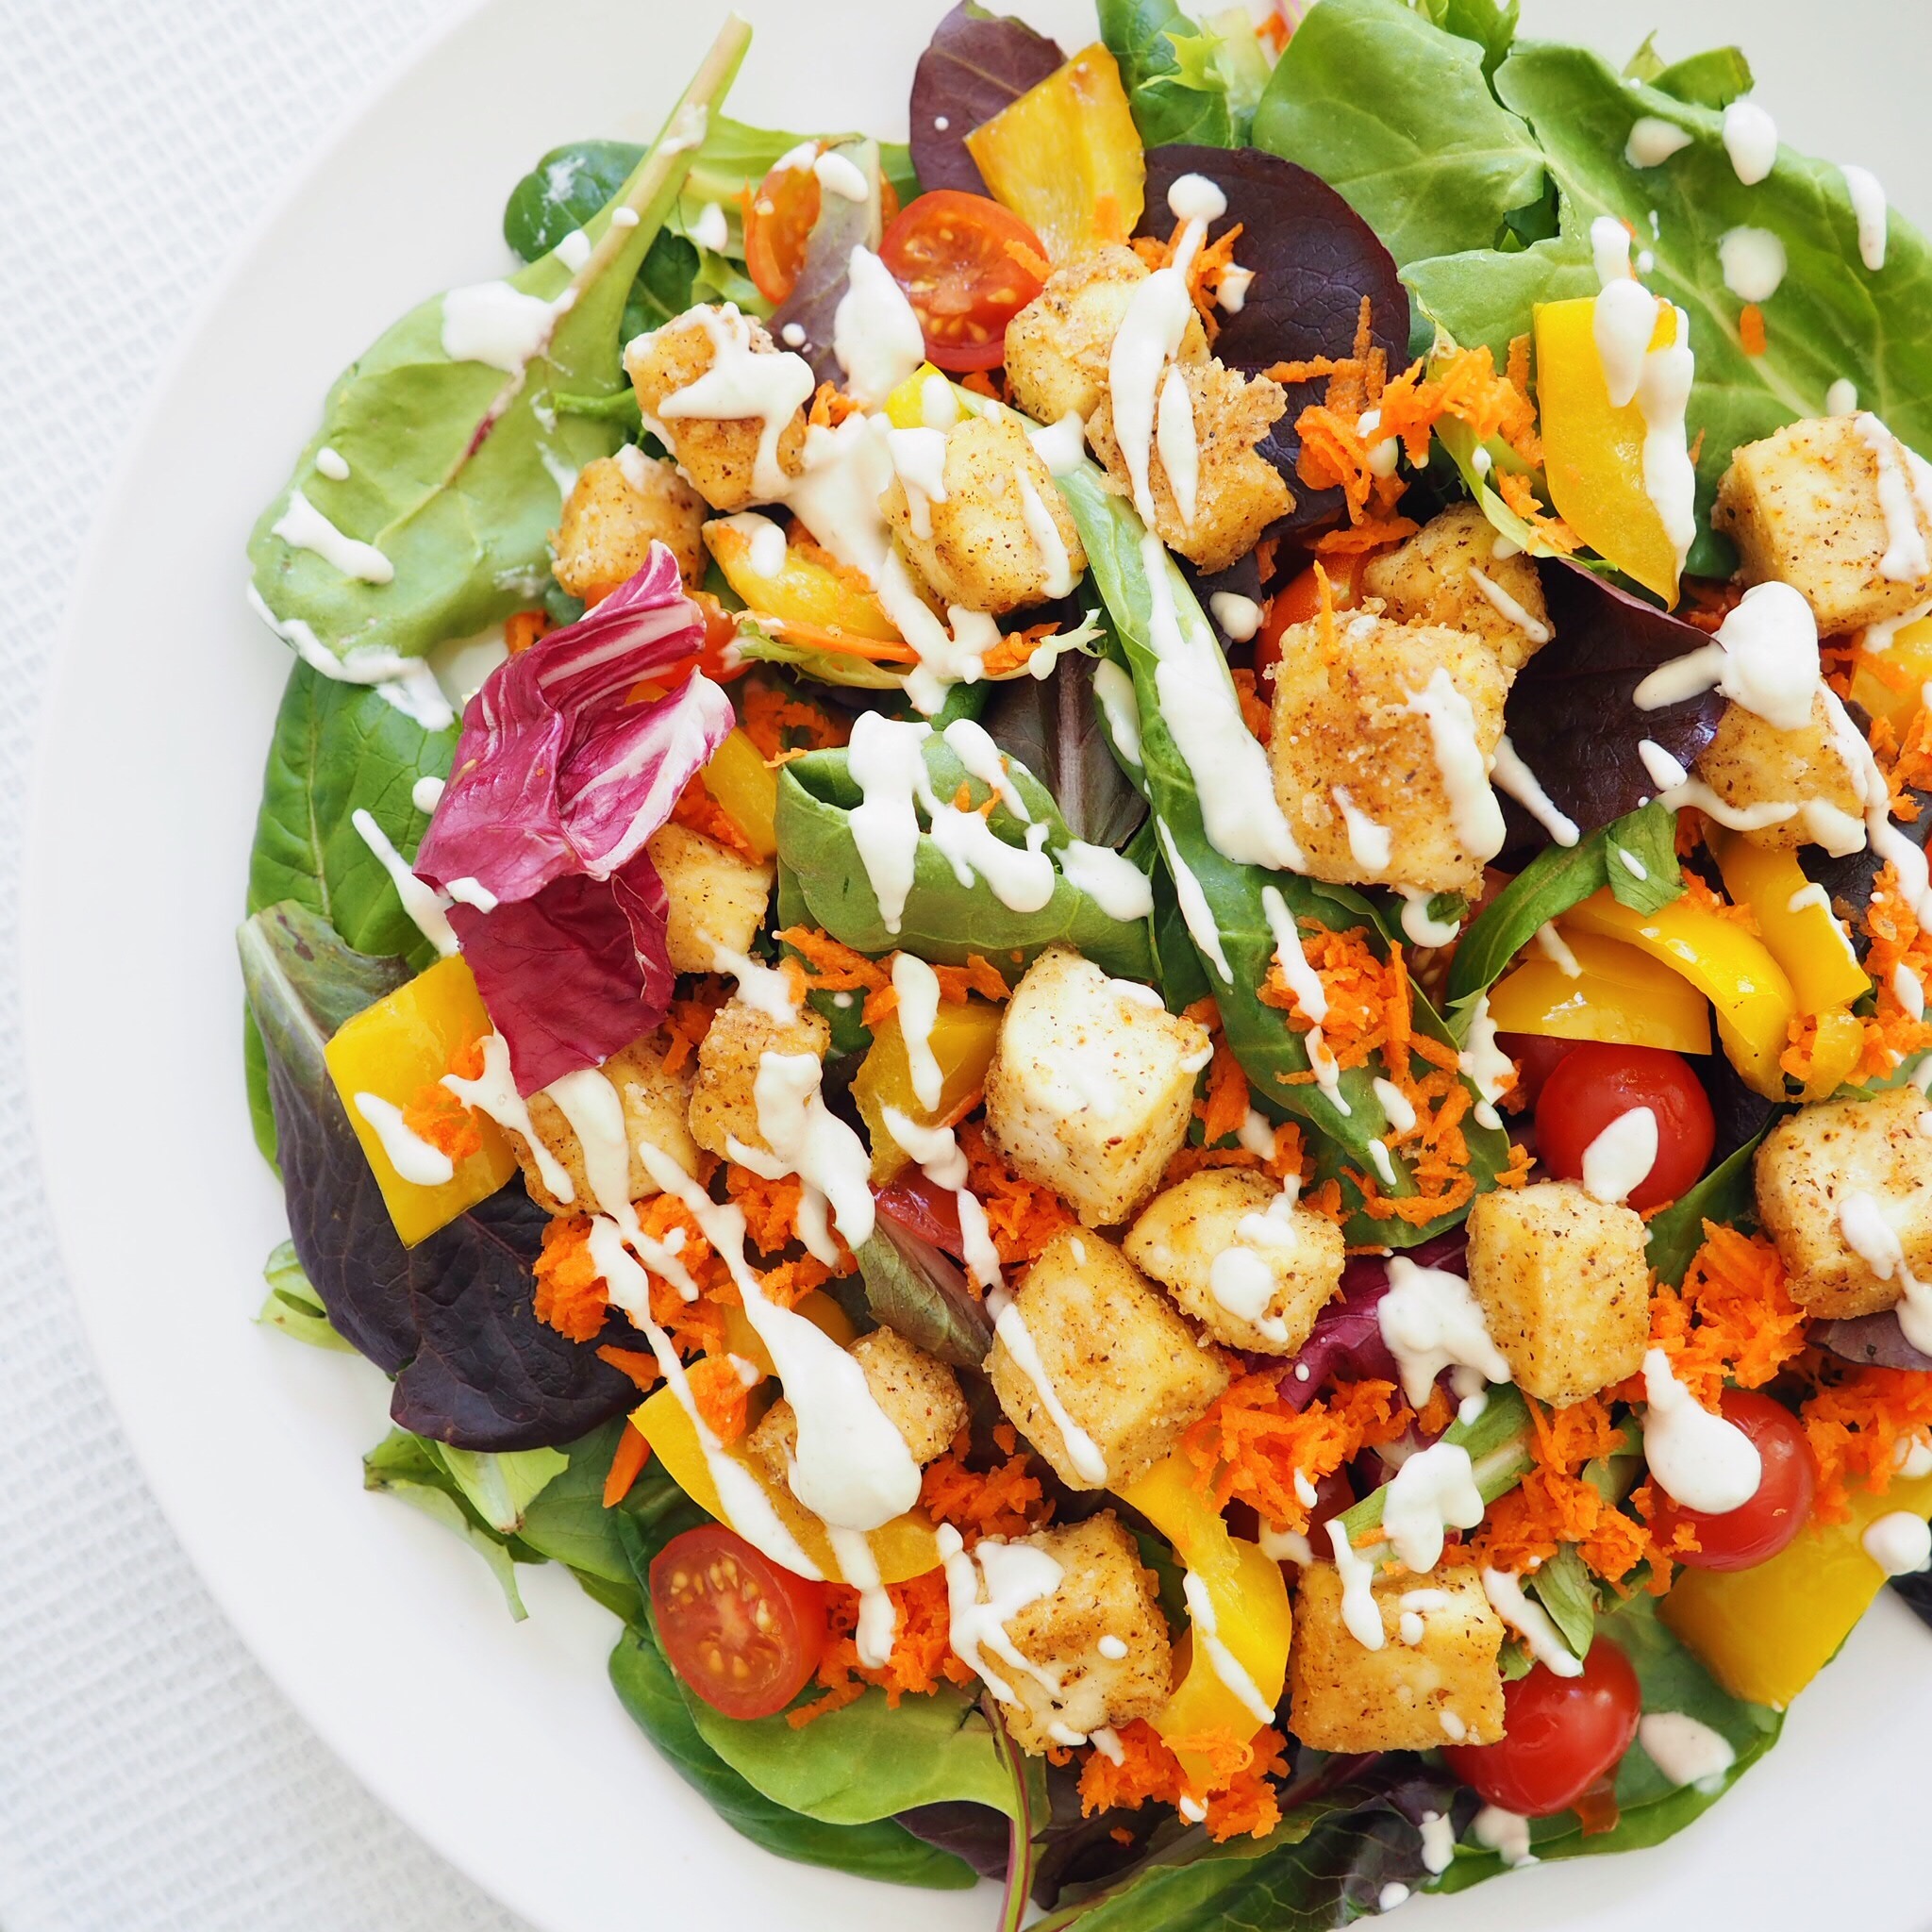 Soft Tofu Summer Salad with Ranch Dressing